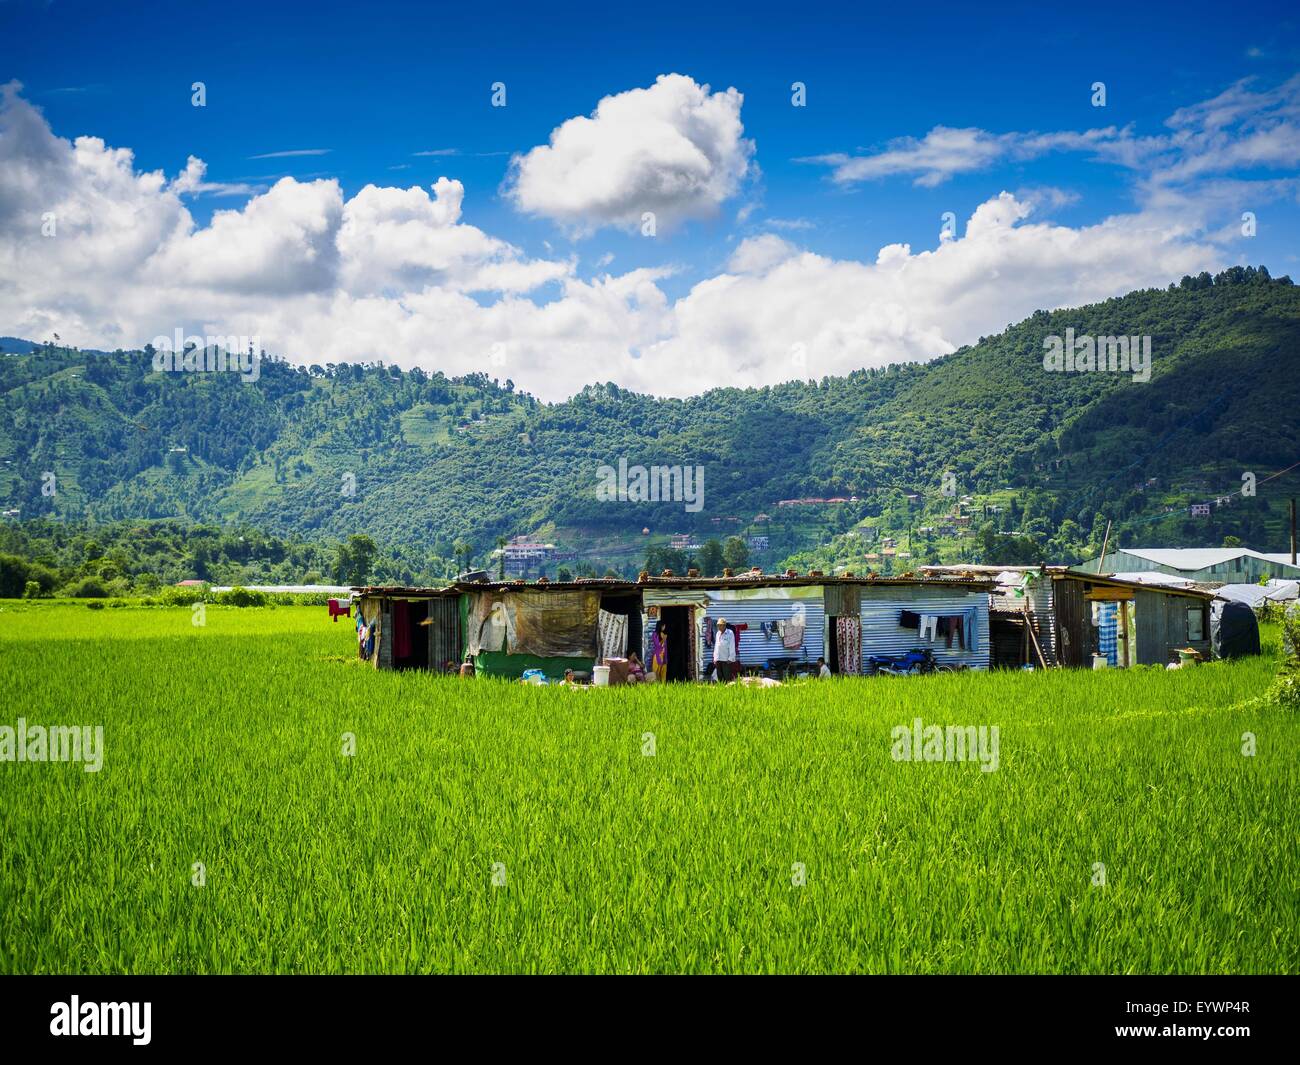 Sankhu, Central Region, Nepal. 3rd Aug, 2015. Farmers live in temporary shelters in their rice fields in Sankhu, a community about 90 minutes from central Kathmandu. Their homes were destroyed in the earthquake. The Nepal Earthquake on April 25, 2015, (also known as the Gorkha earthquake) killed more than 9,000 people and injured more than 23,000. It had a magnitude of 7.8.  It was the worst natural disaster to strike Nepal since the 1934 Nepal''“Bihar earthquake. © ZUMA Press, Inc./Alamy Live News Stock Photo